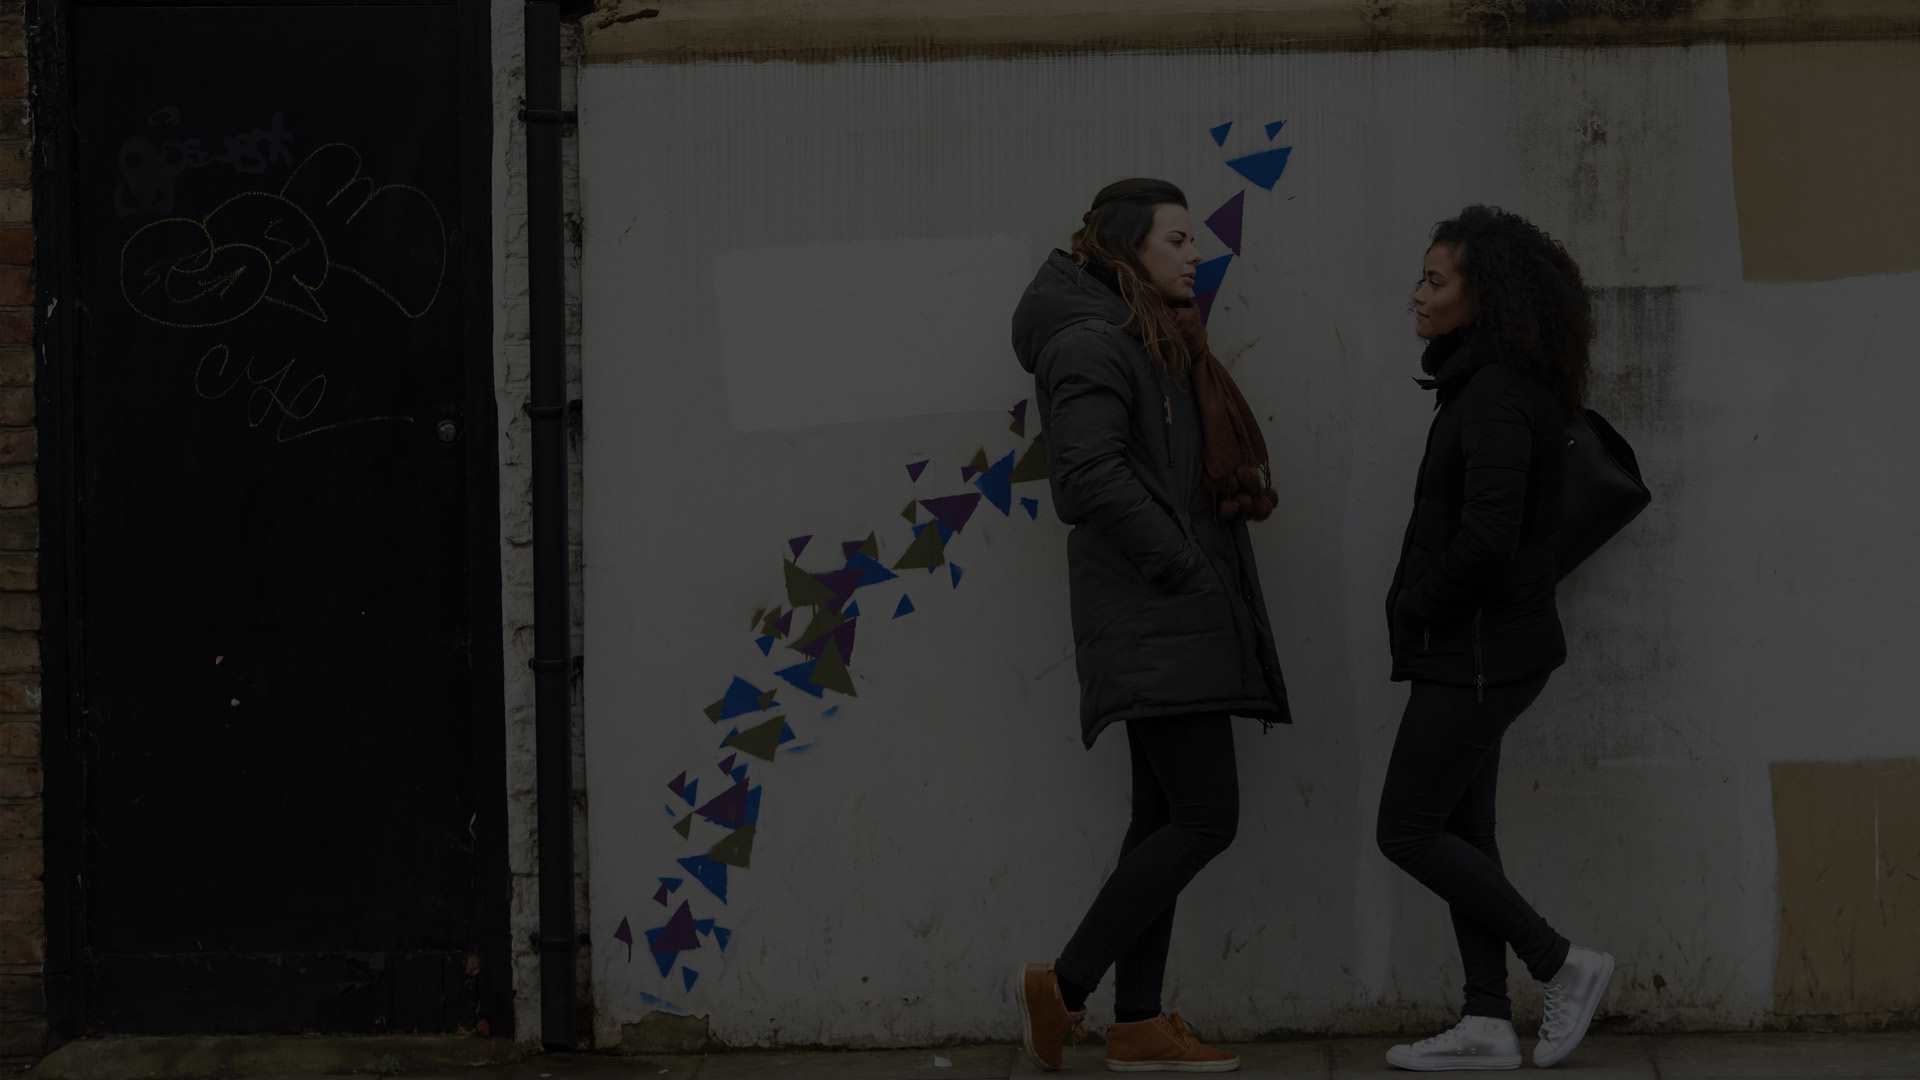 Two young people talking against a brick wall